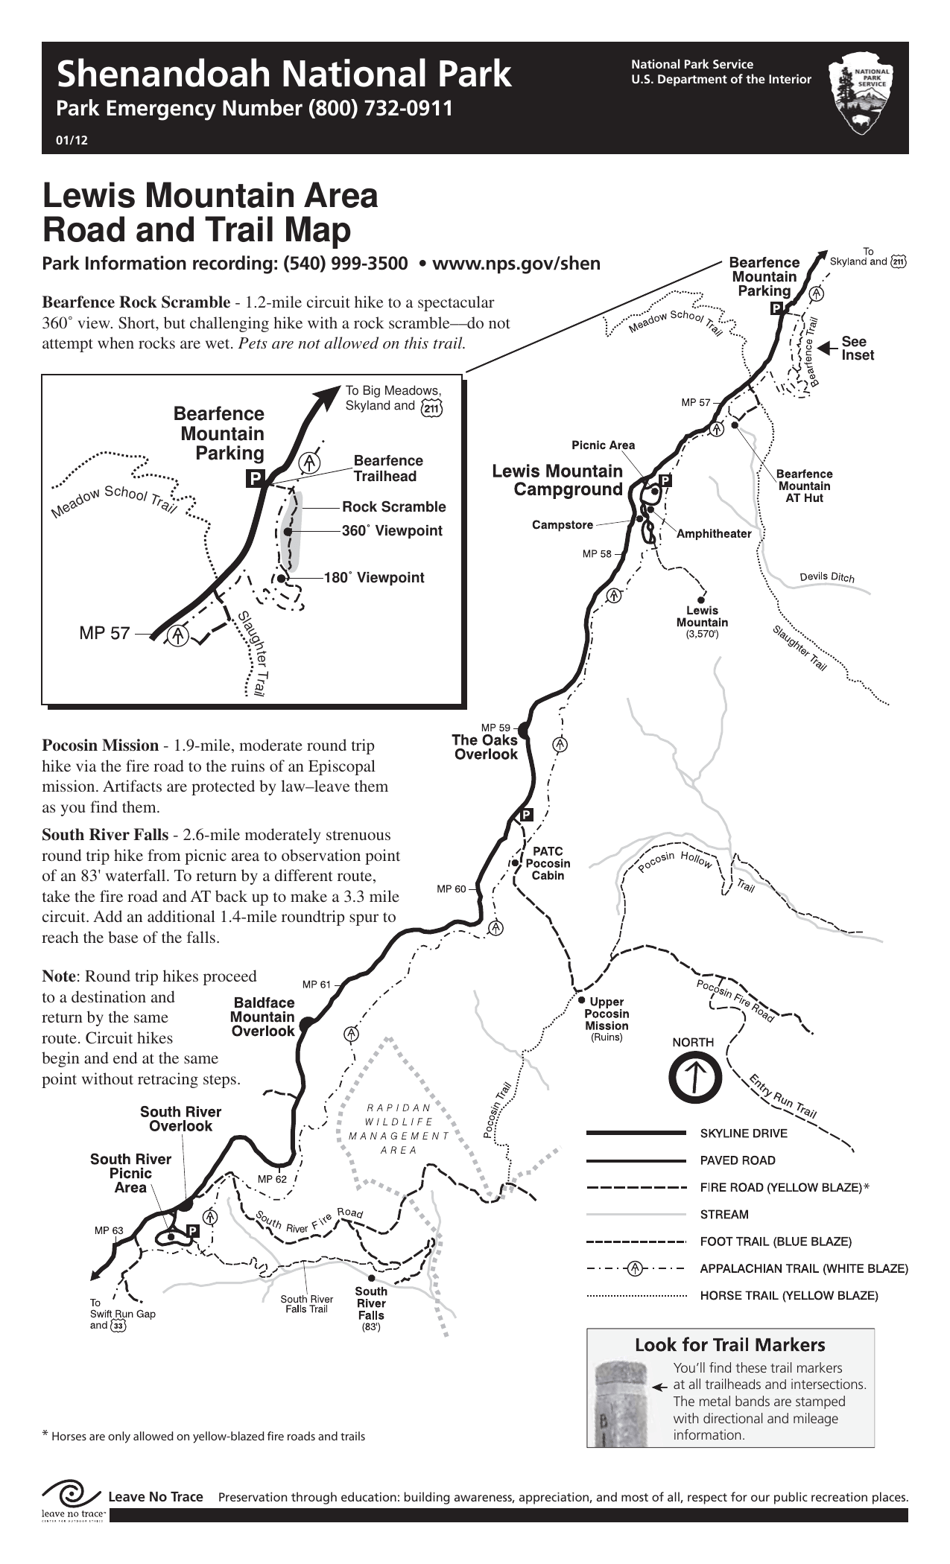 Lewis Mountain Area Road and Trail Map - Shenandoah National Park, Page 1